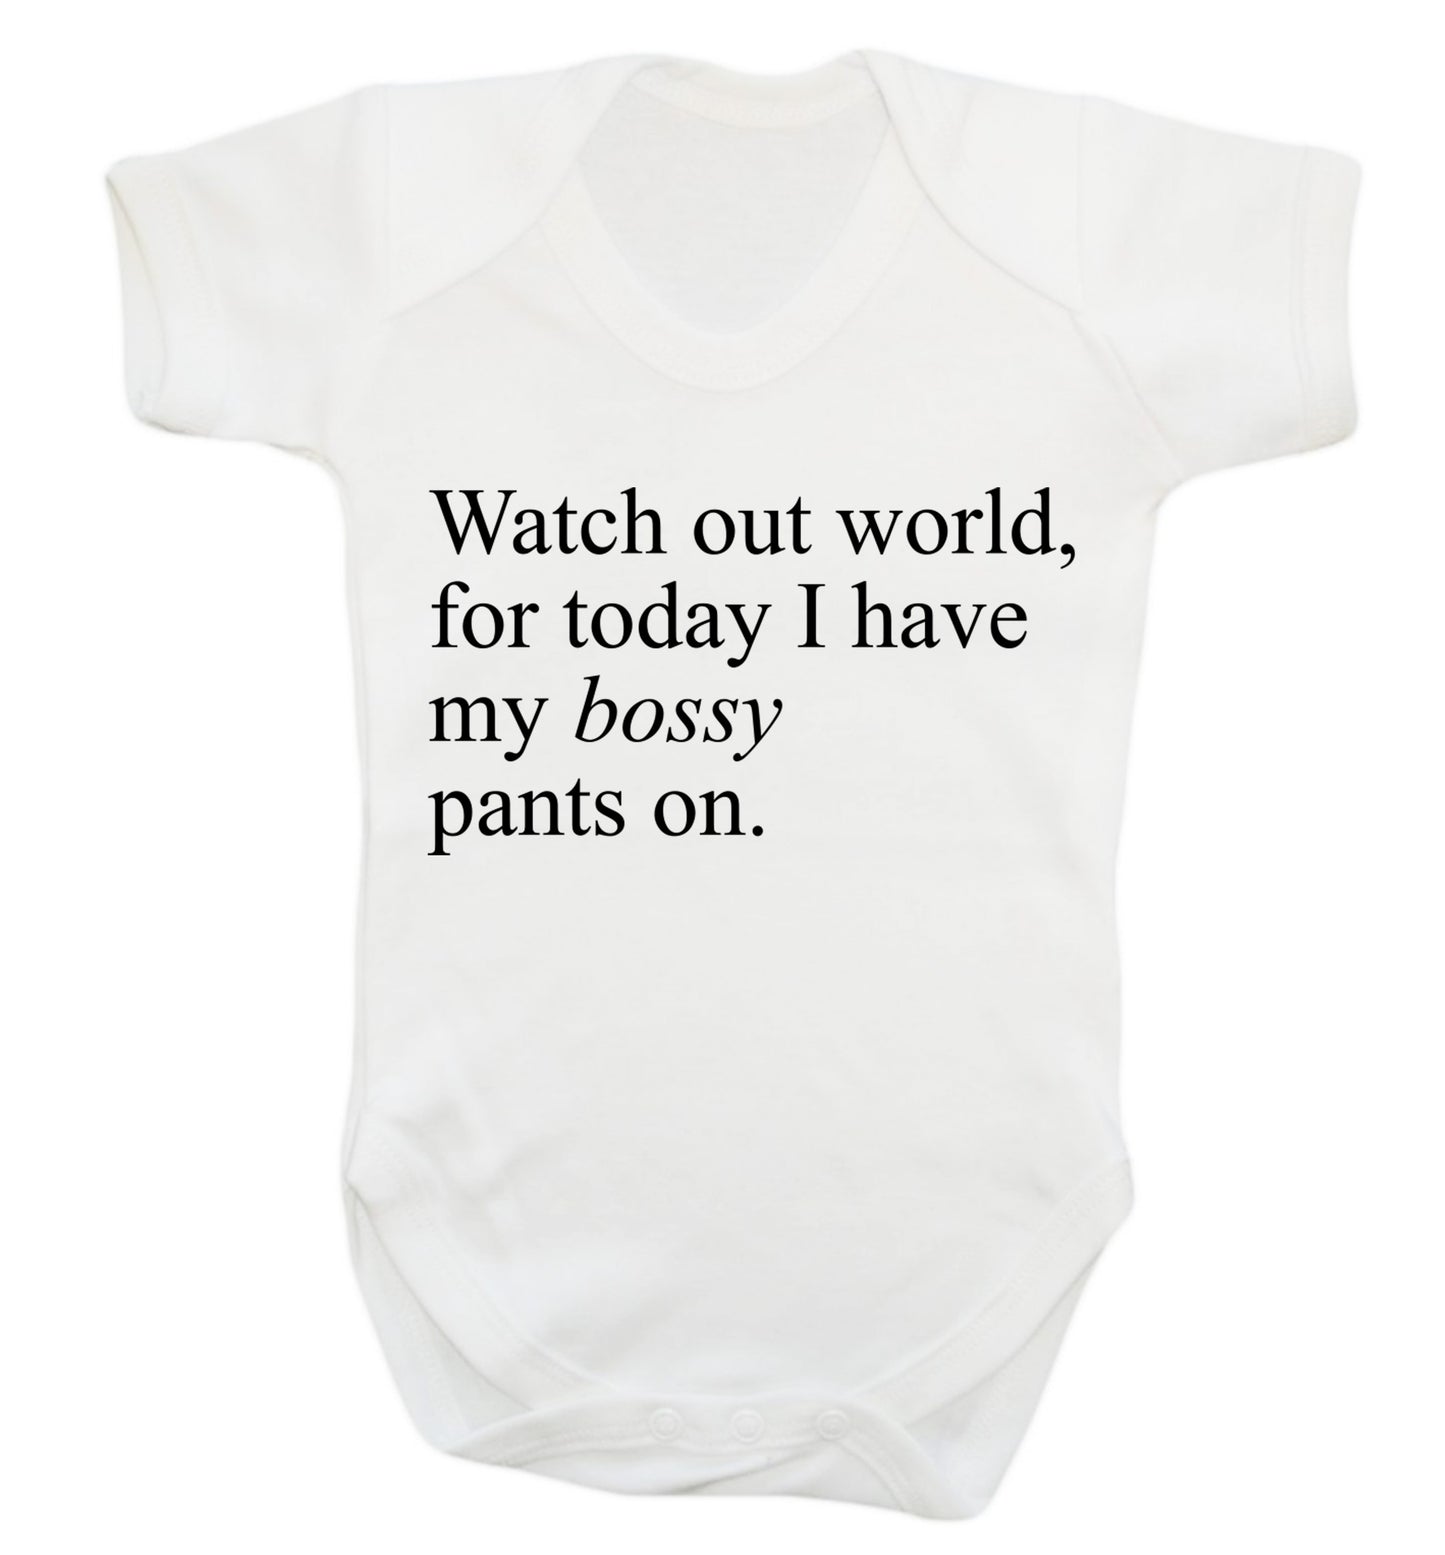 Watch out world, for today I have my bossy pants on Baby Vest white 18-24 months